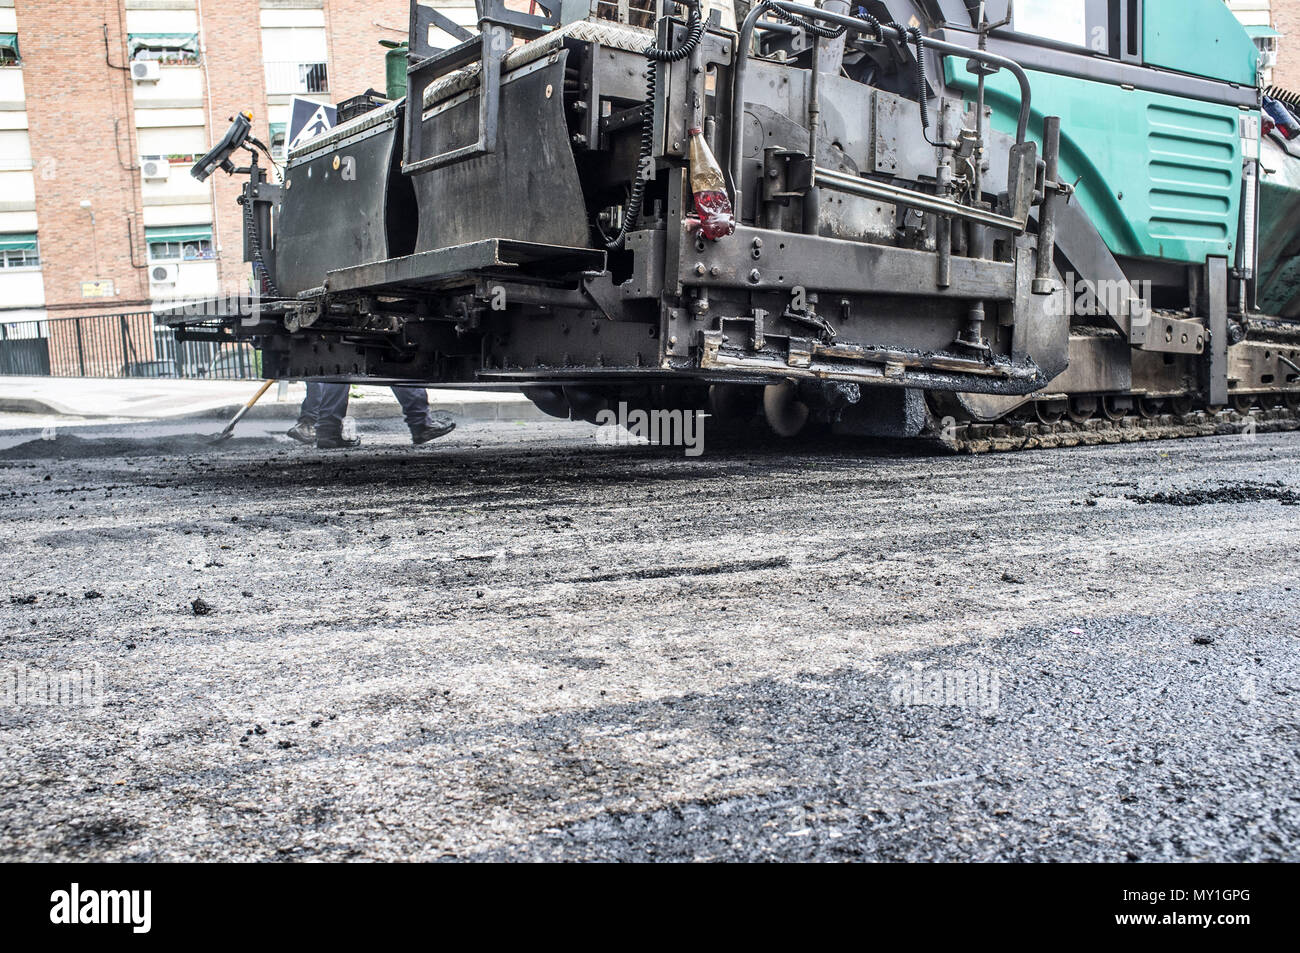 Work on the laying of asphalt in the city. Paving applicator machine or paver at work Stock Photo